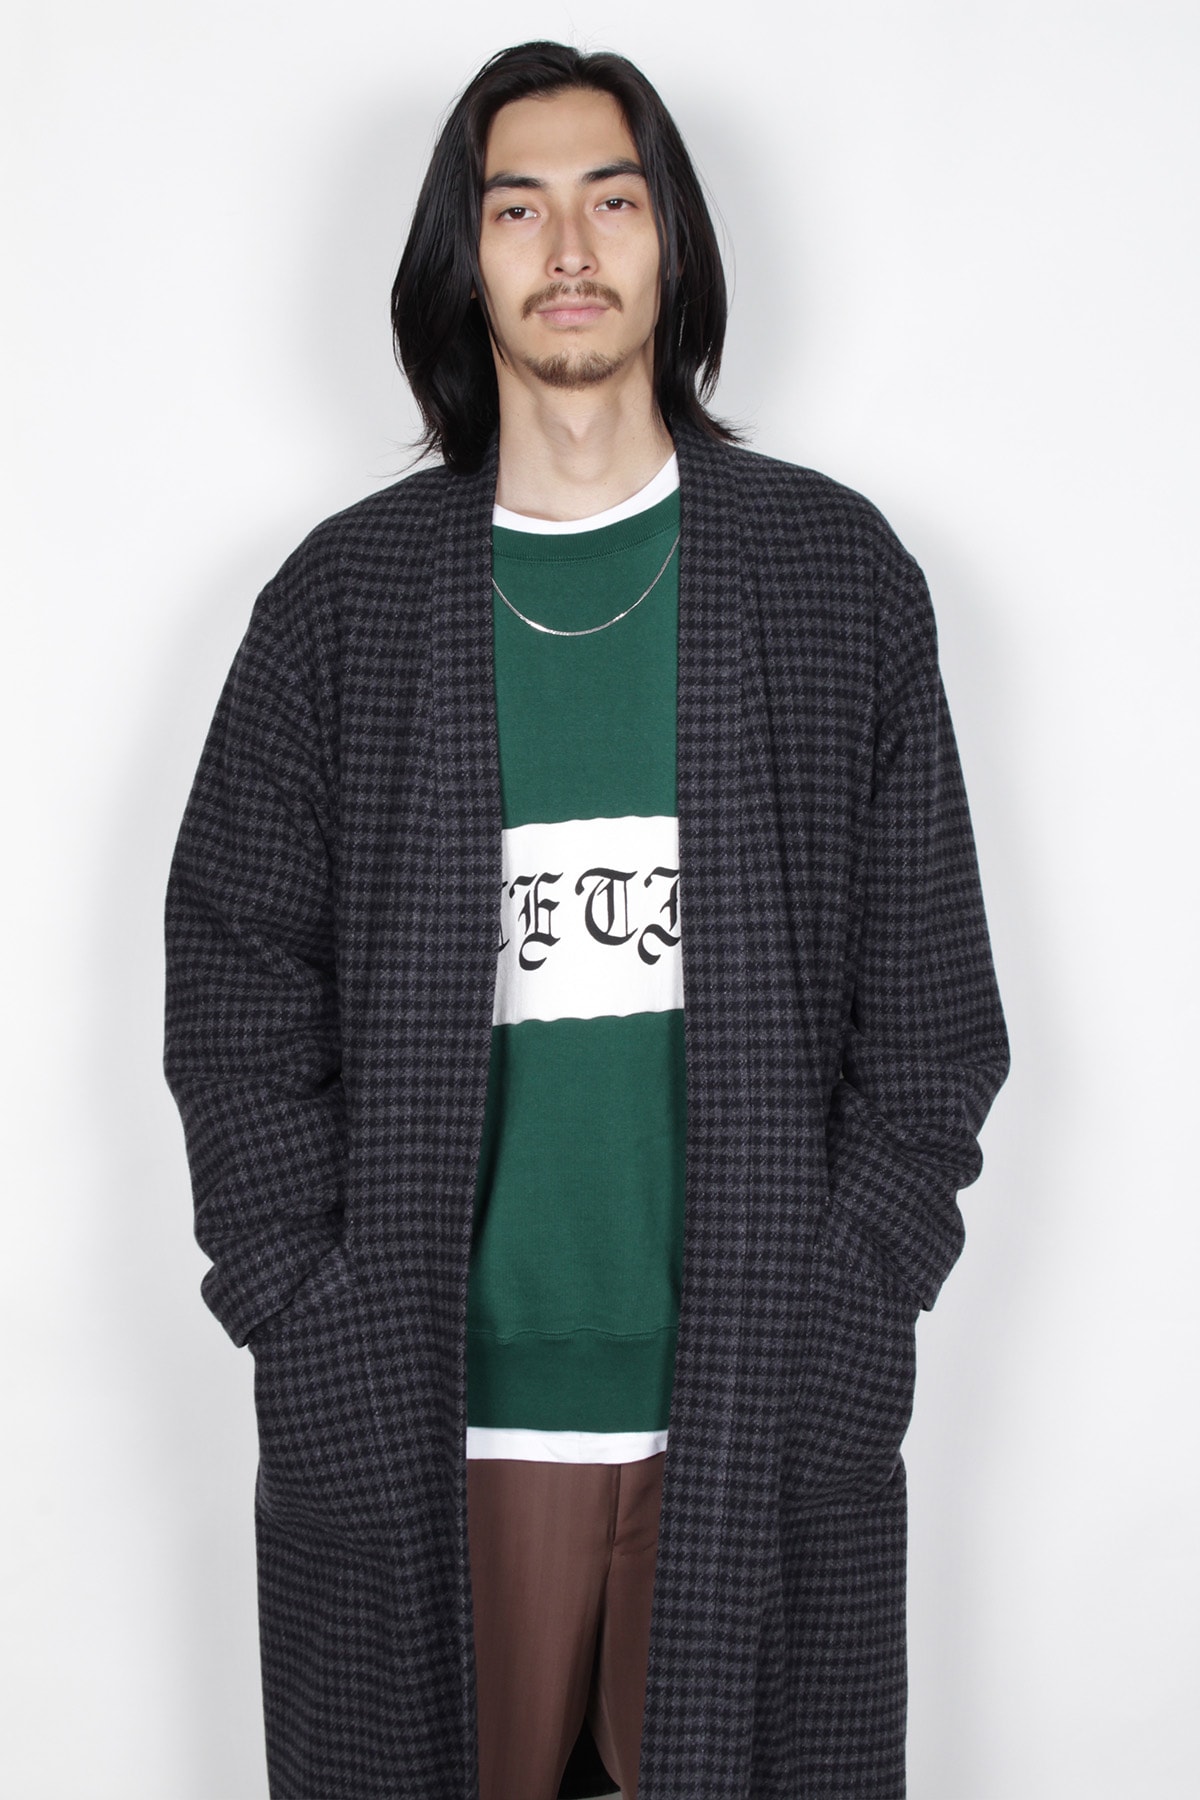 wacko maria dropped 2019 fall winter lookbook collection items leopard animal check ワコマリア 2019 秋冬 ルックブック アニマル柄 チェック 天国東京殺人音楽放送局 music arts film inspired themed collection